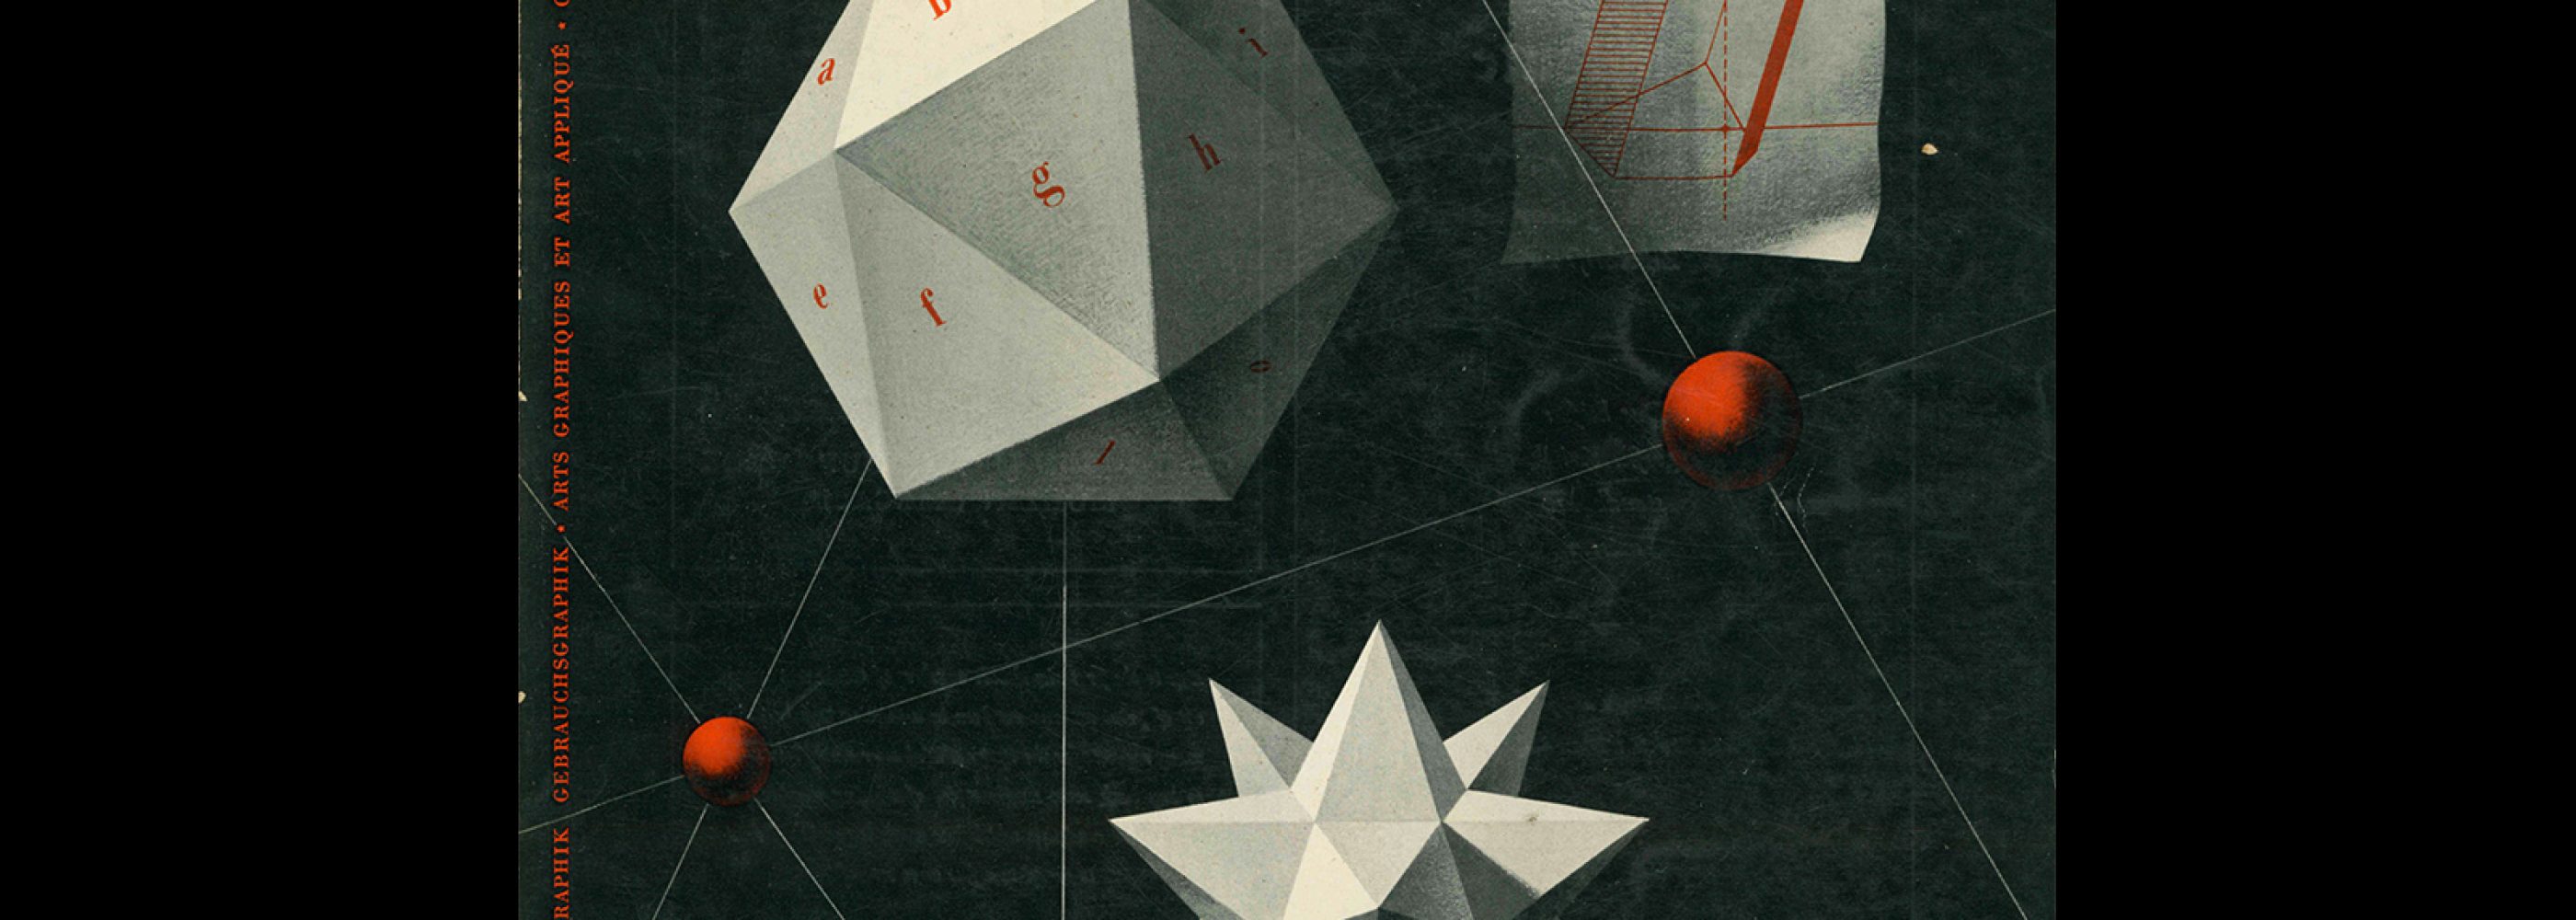 Graphis 22, 1948. Cover design by Jacques Nathan-Garamond